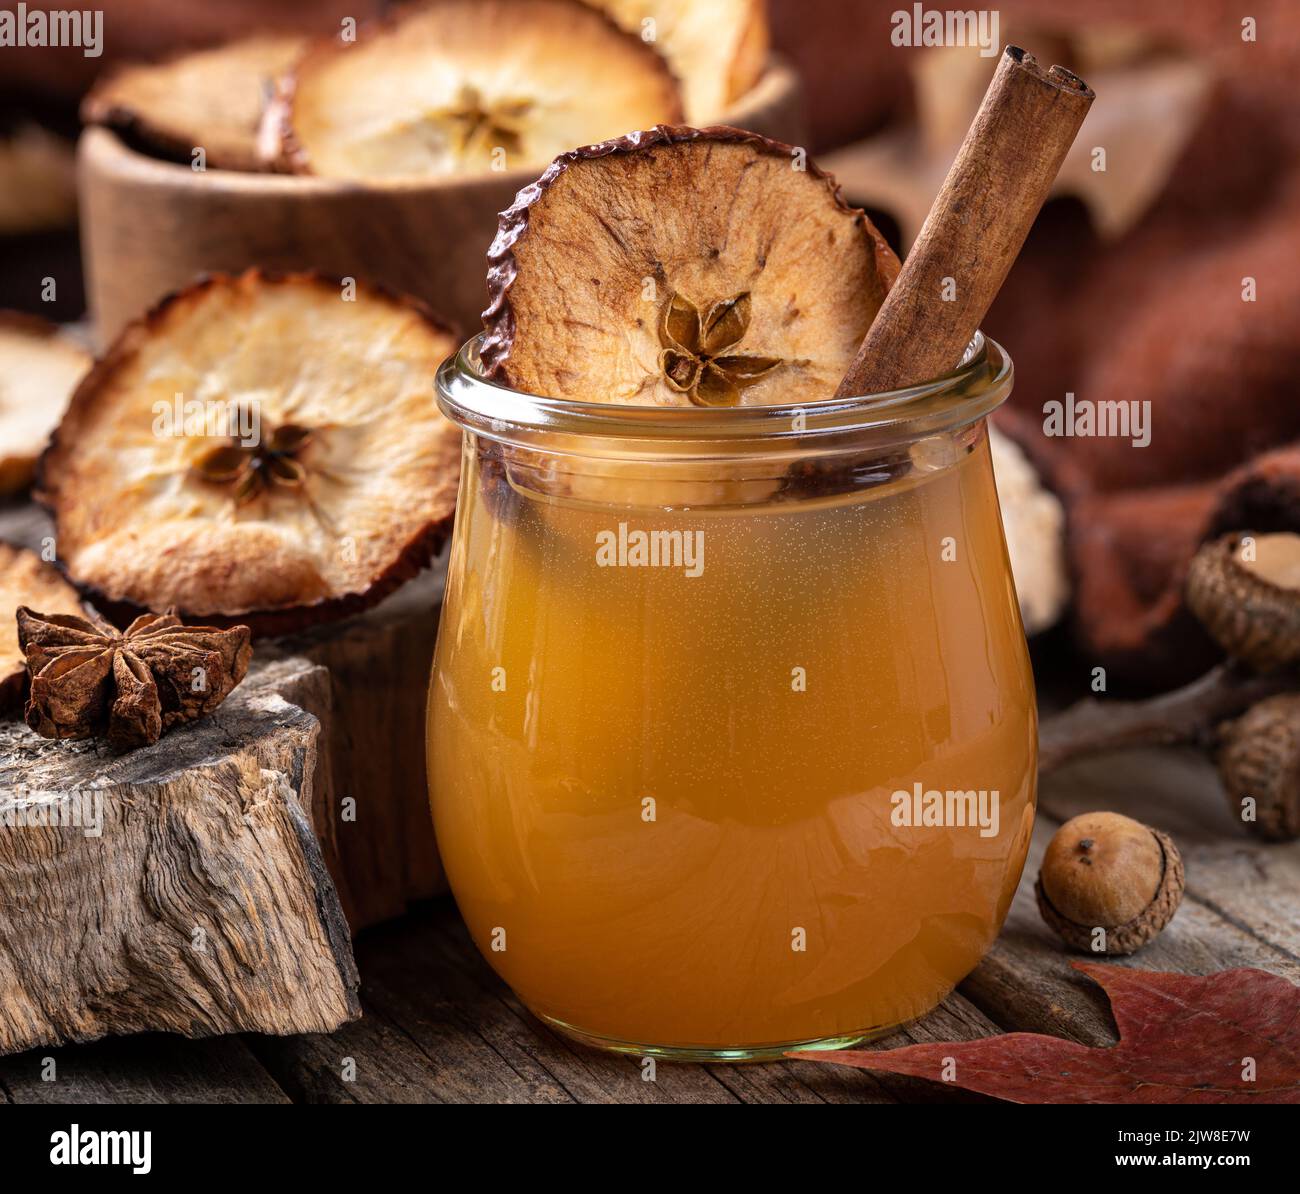 Closeup of glass of apple cider with cinnamon stick and dried apple chip on a rustic wooden table Stock Photo